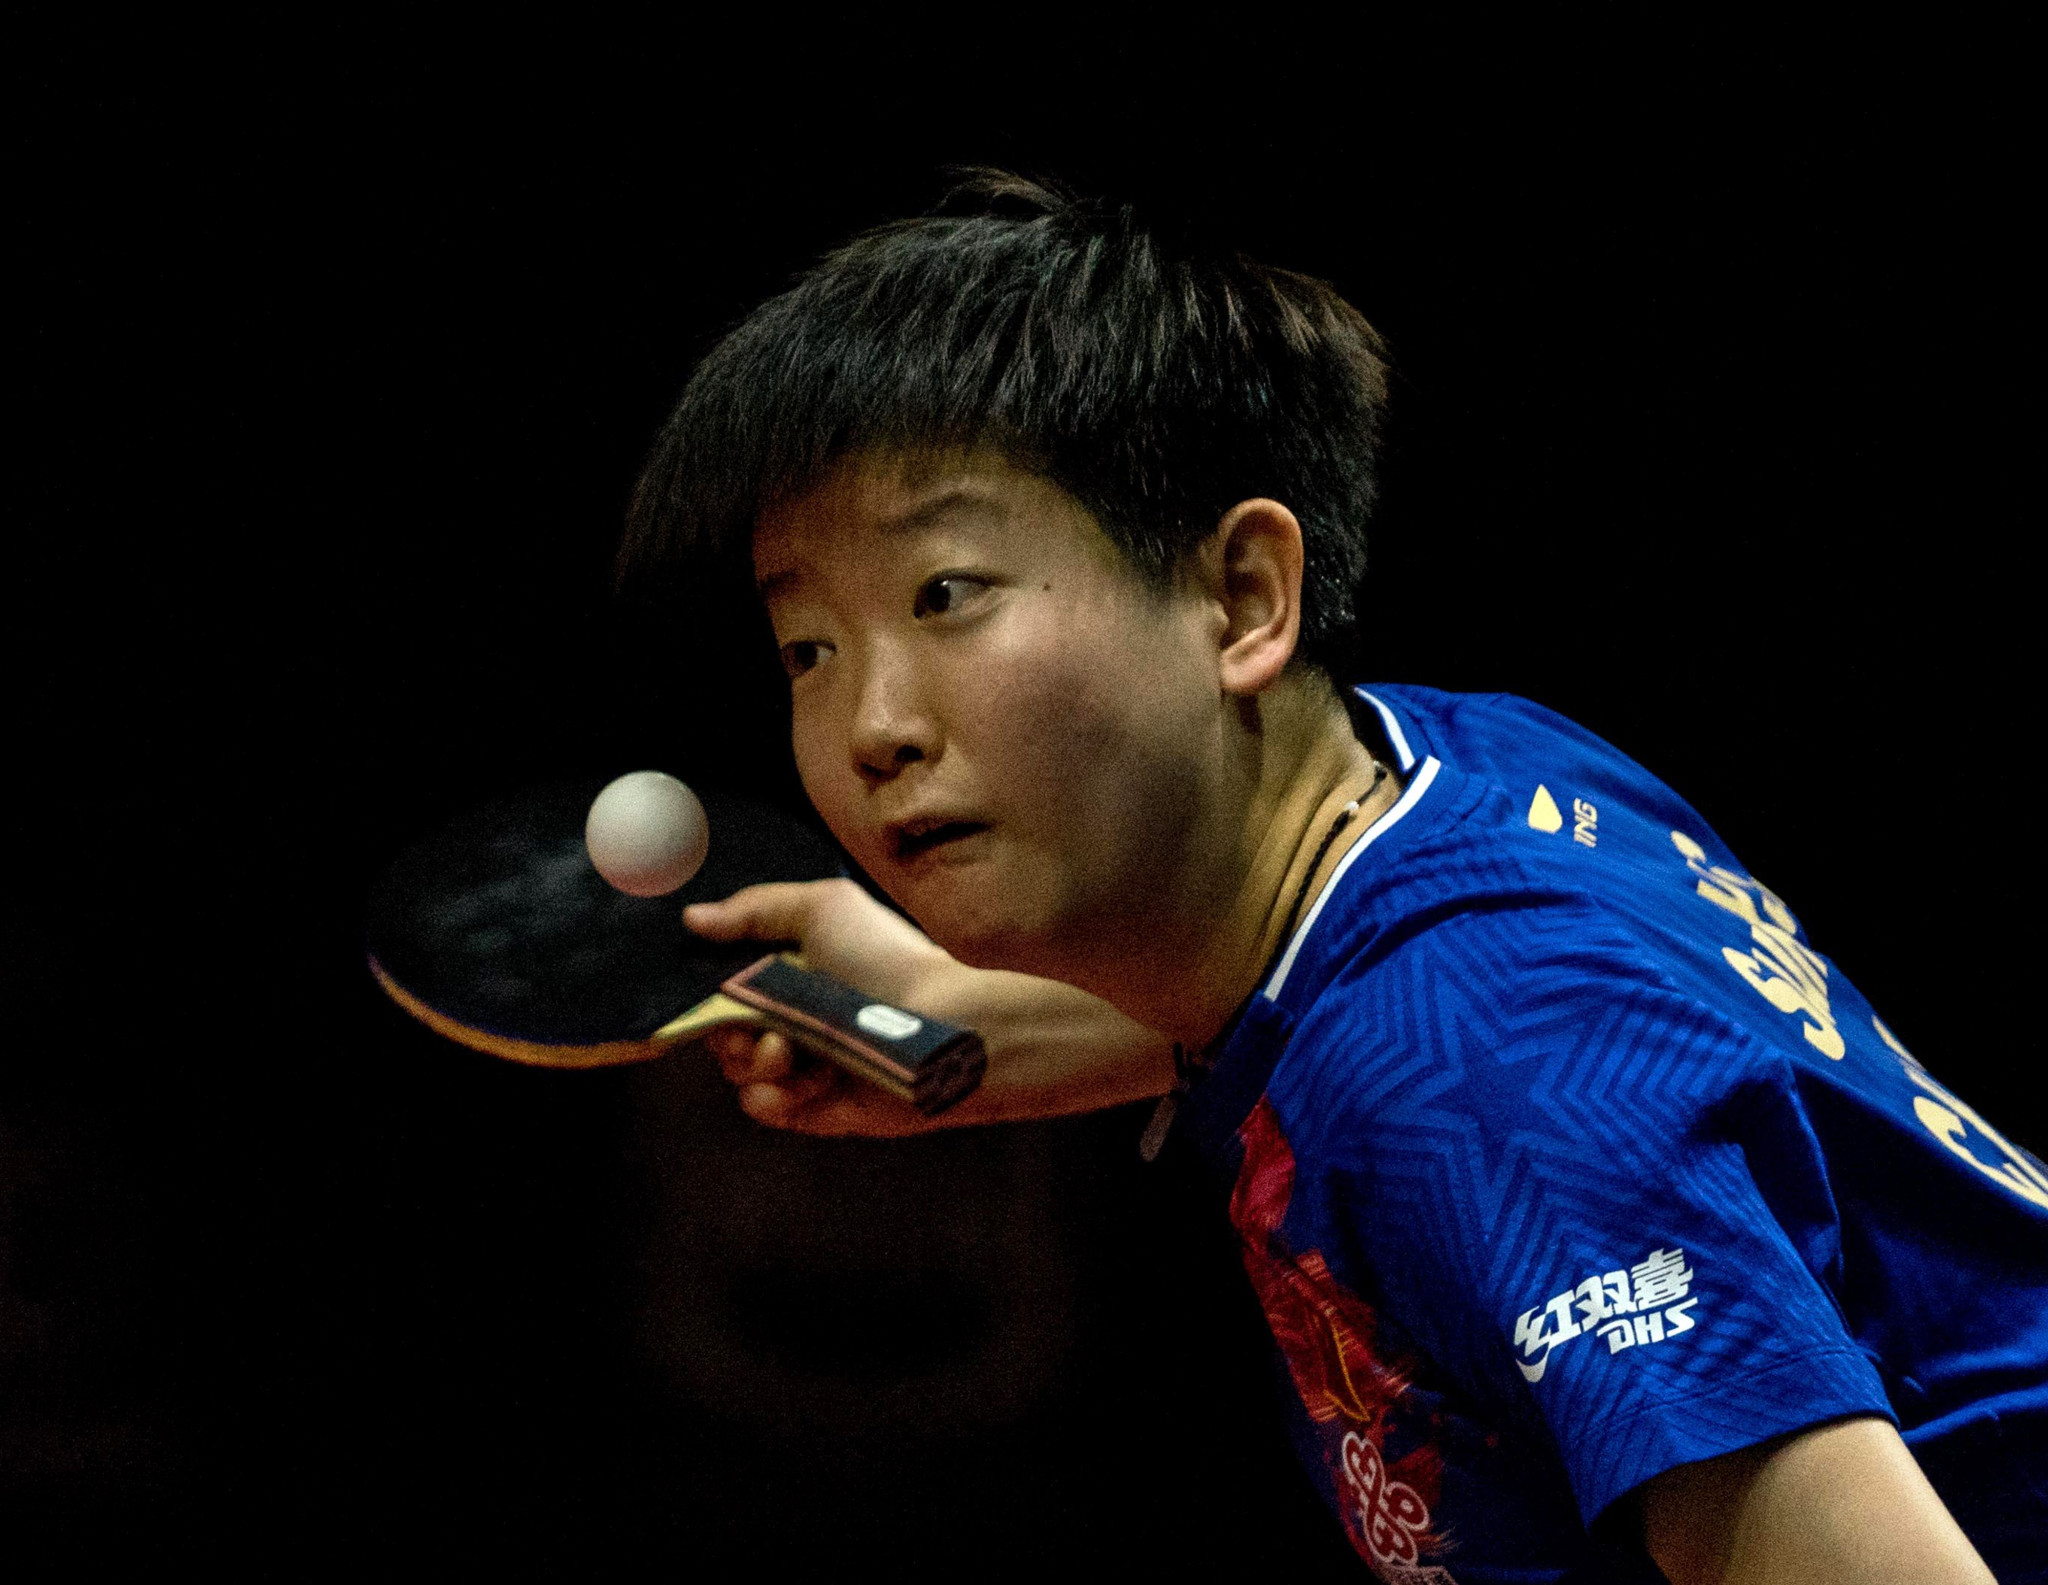 Sun Yingsha, 18, beat fellow Chinese Ding Ning and Liu Shiwen, world-ranked 3 and 2, to win the women's singles at the Asian Table Tennis Championships ©Getty Images